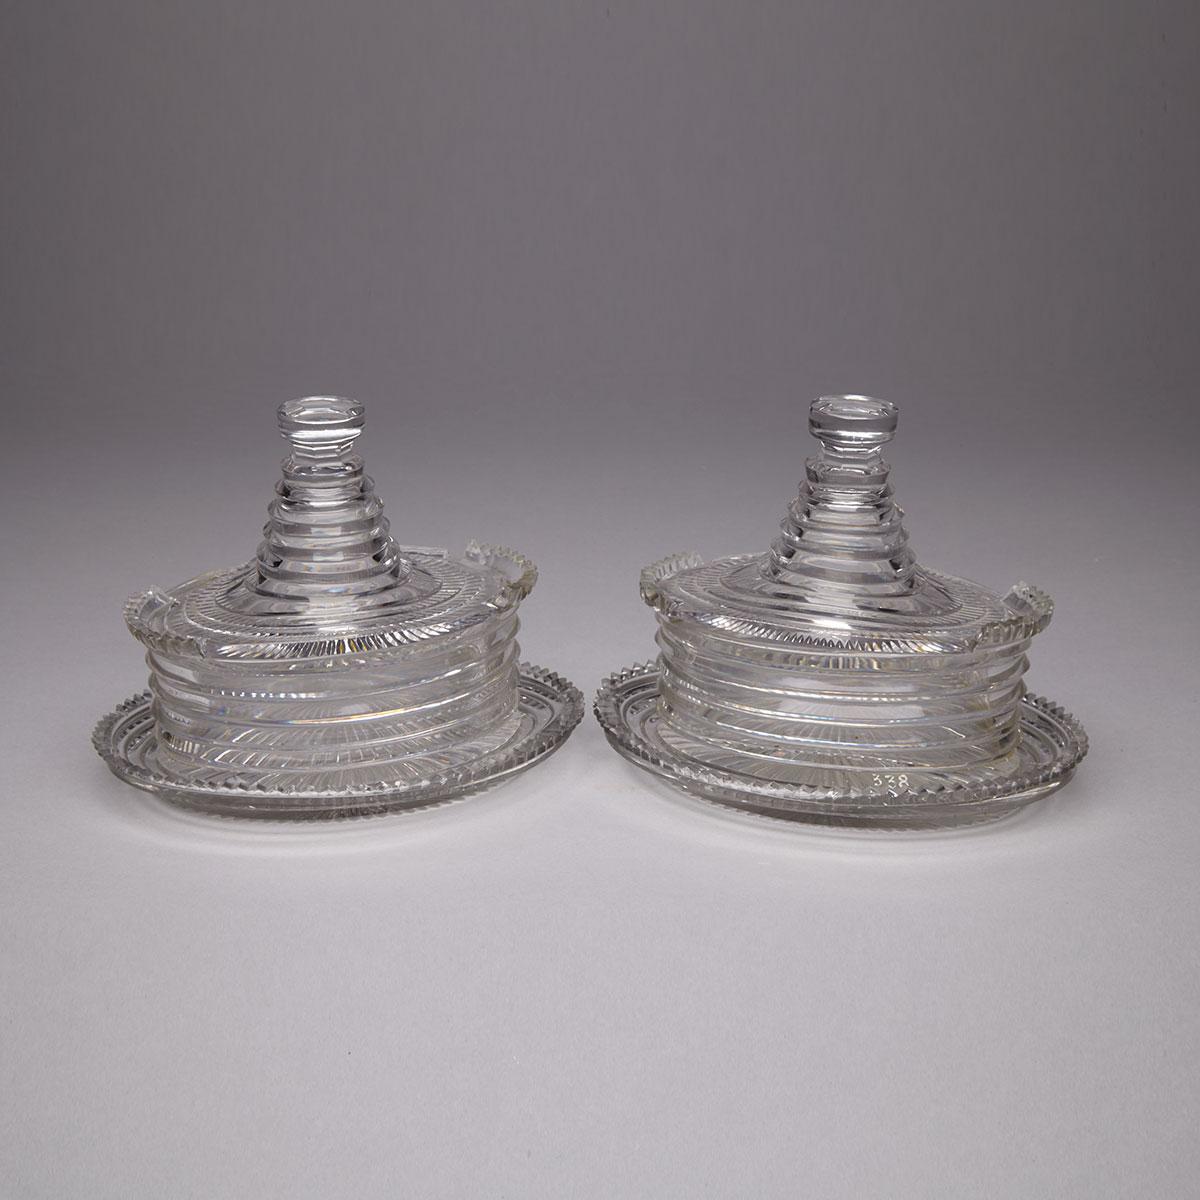 Pair of Anglo-Irish Cut Glass Oval Butter Dishes with Covers and Stands, early 19th century